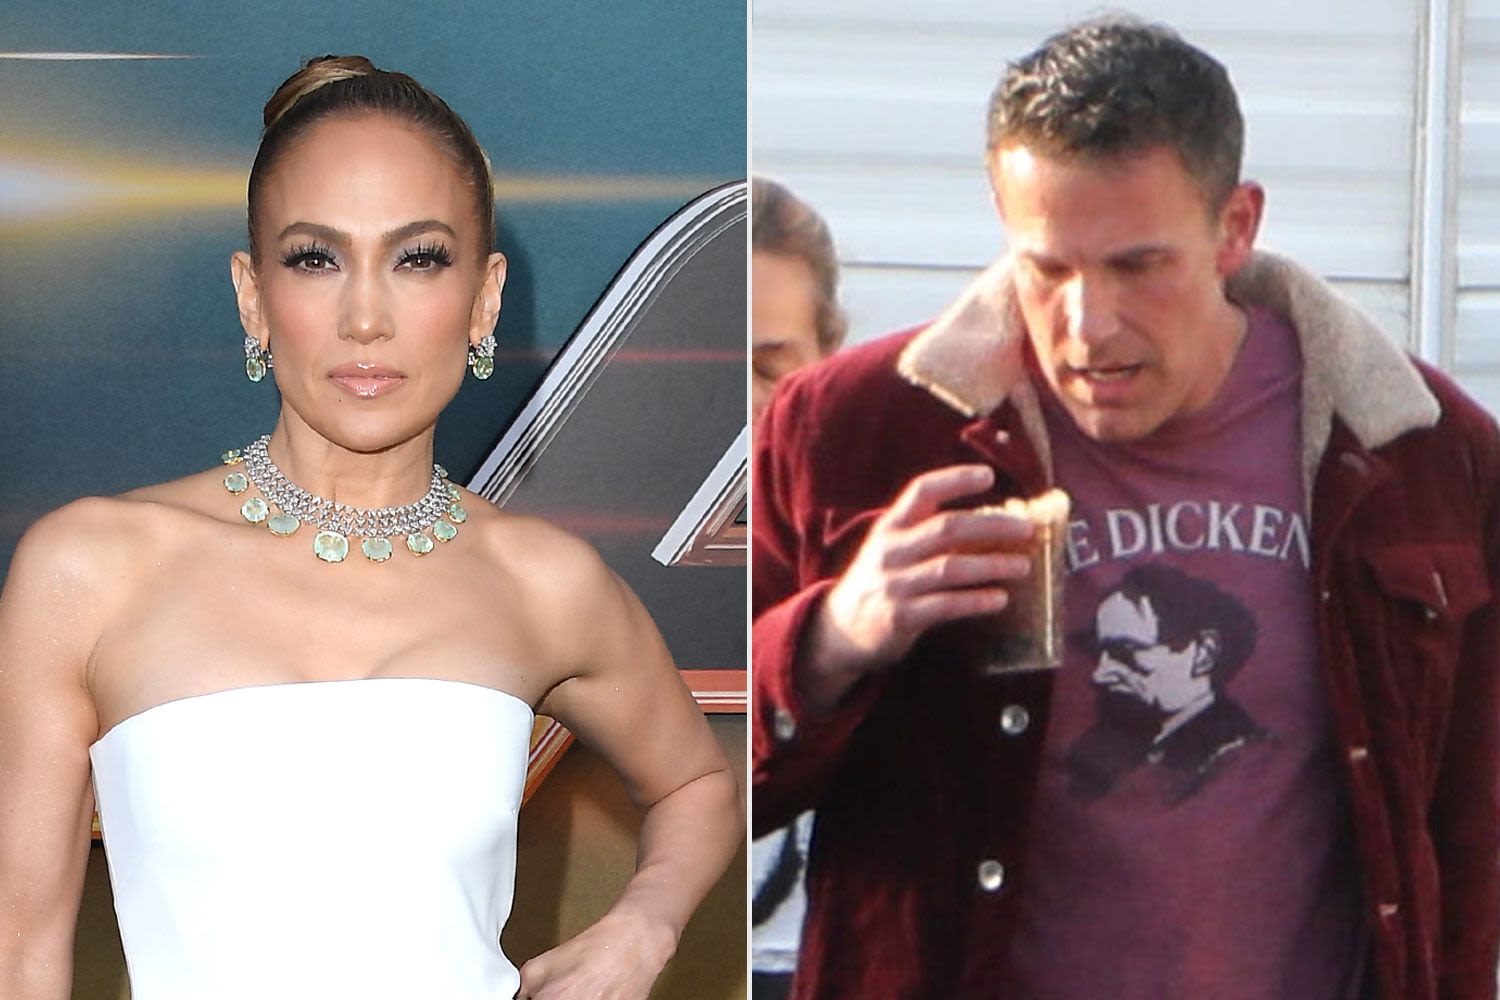 Why Ben Affleck Was Absent from Jennifer Lopez's “Atlas ”Movie Premiere in Los Angeles